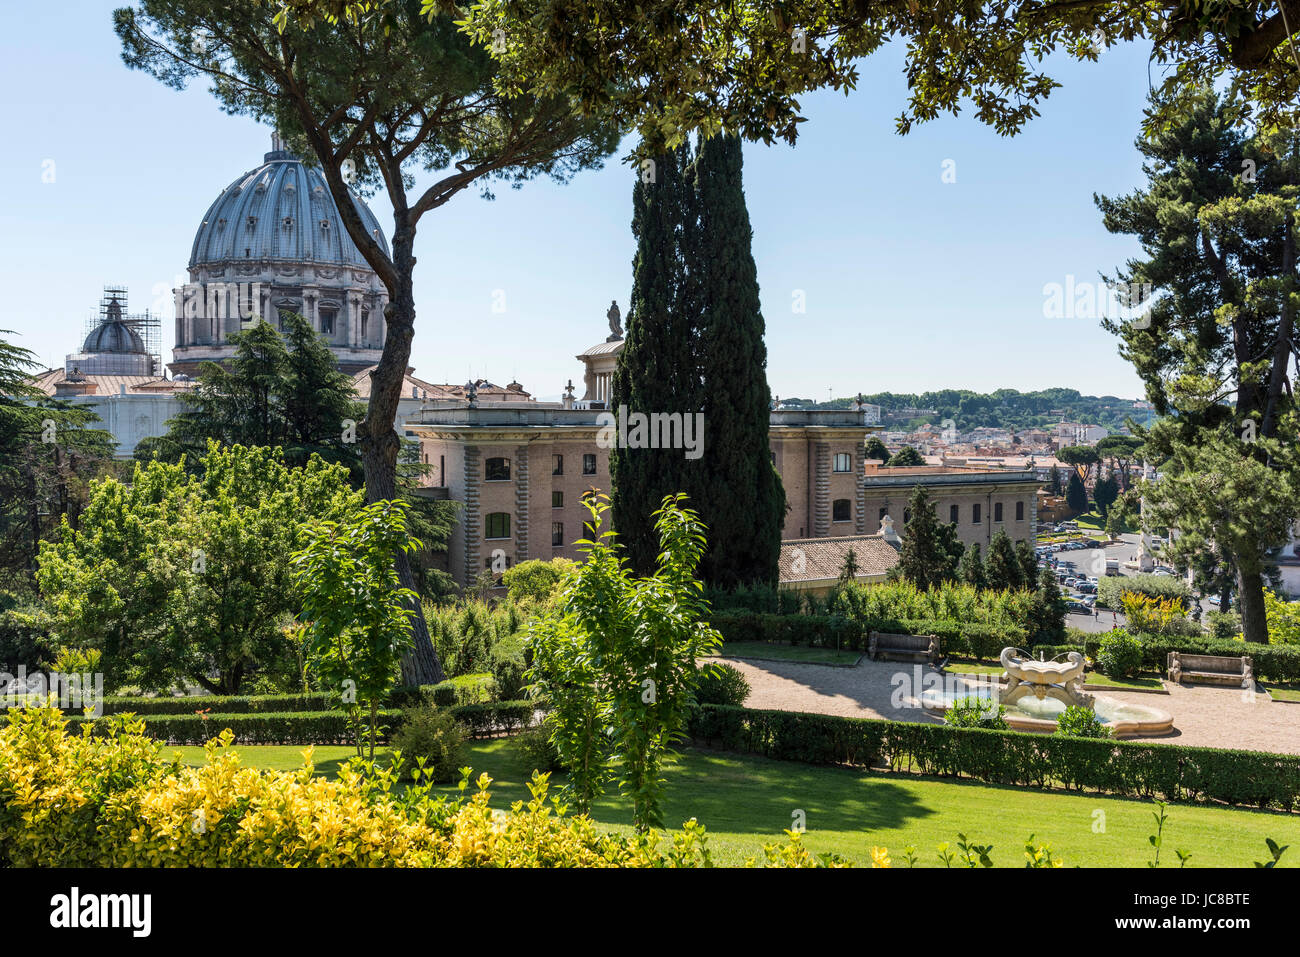 Rome. Italy. View of the dome of St Peter's Basilica and the Vatican Gardens. Giardini Vaticani. Stock Photo